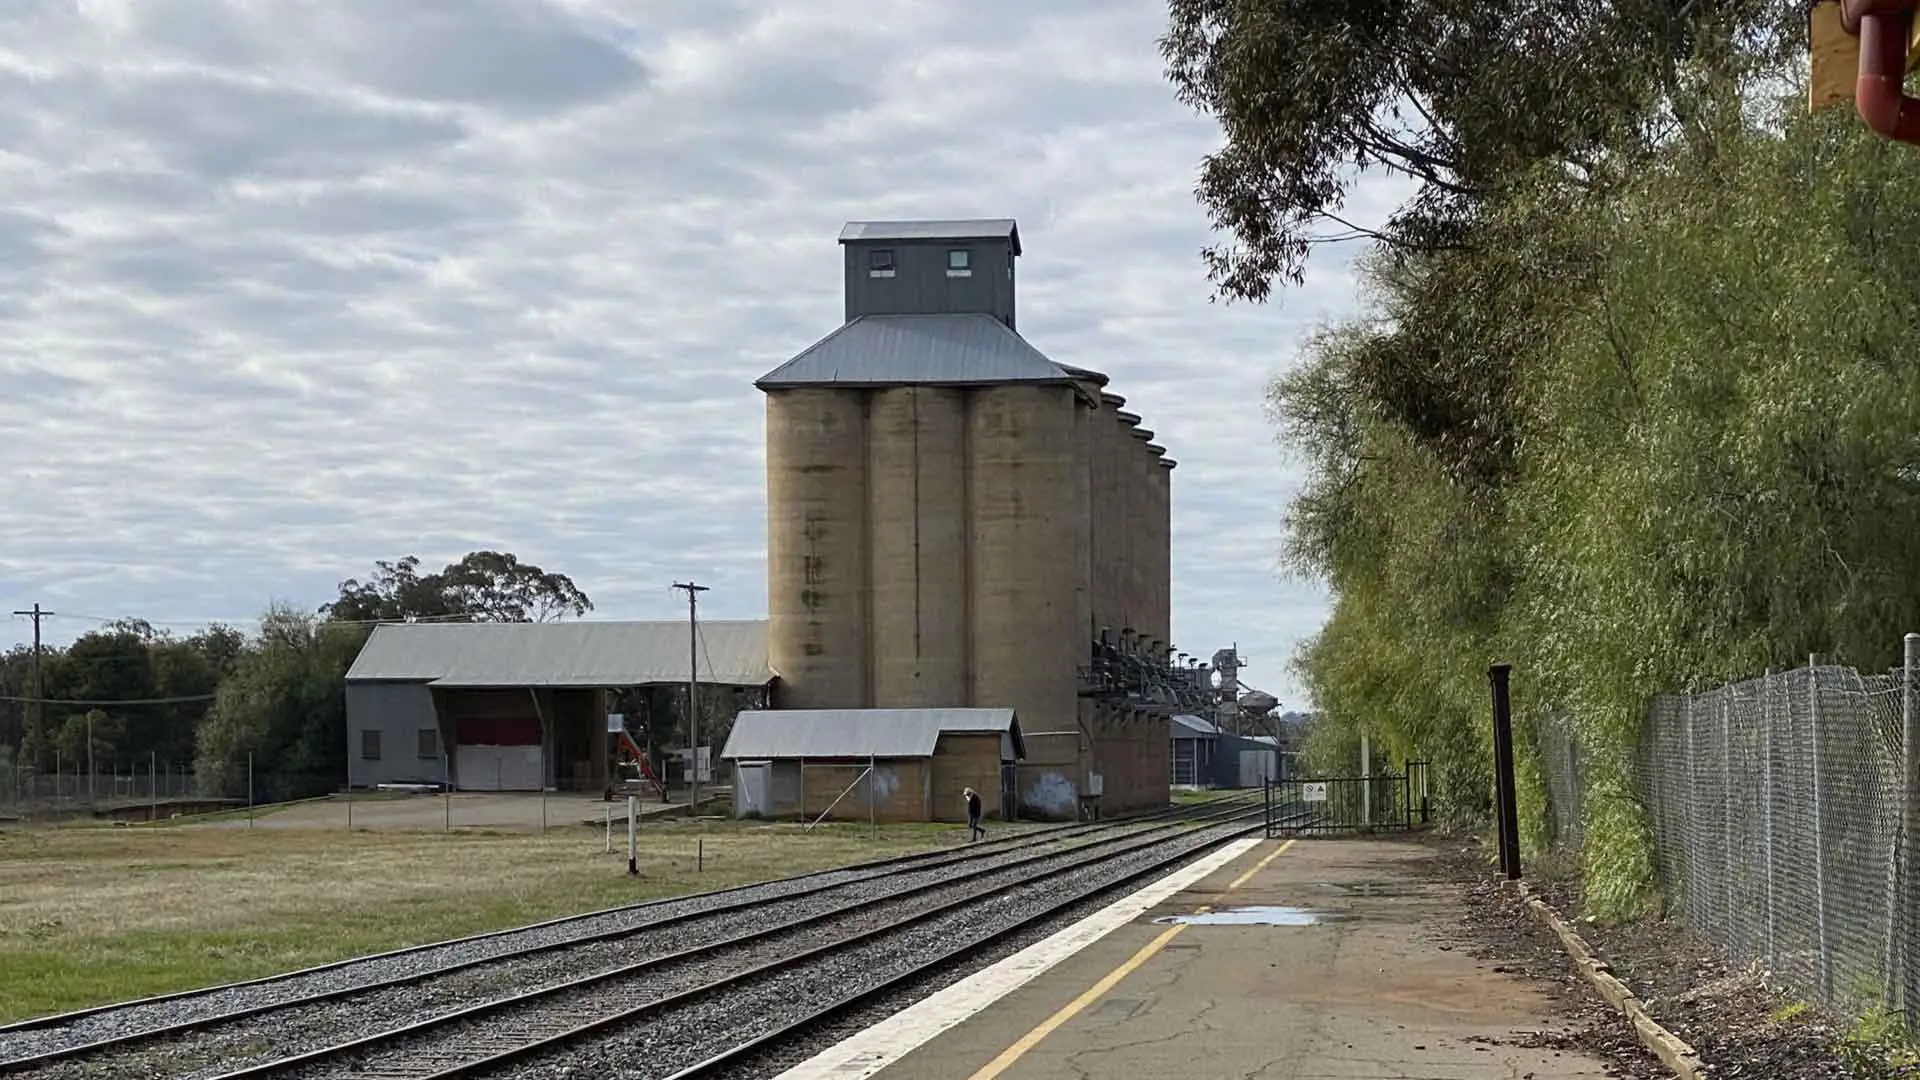 The Old Station Located in Australia